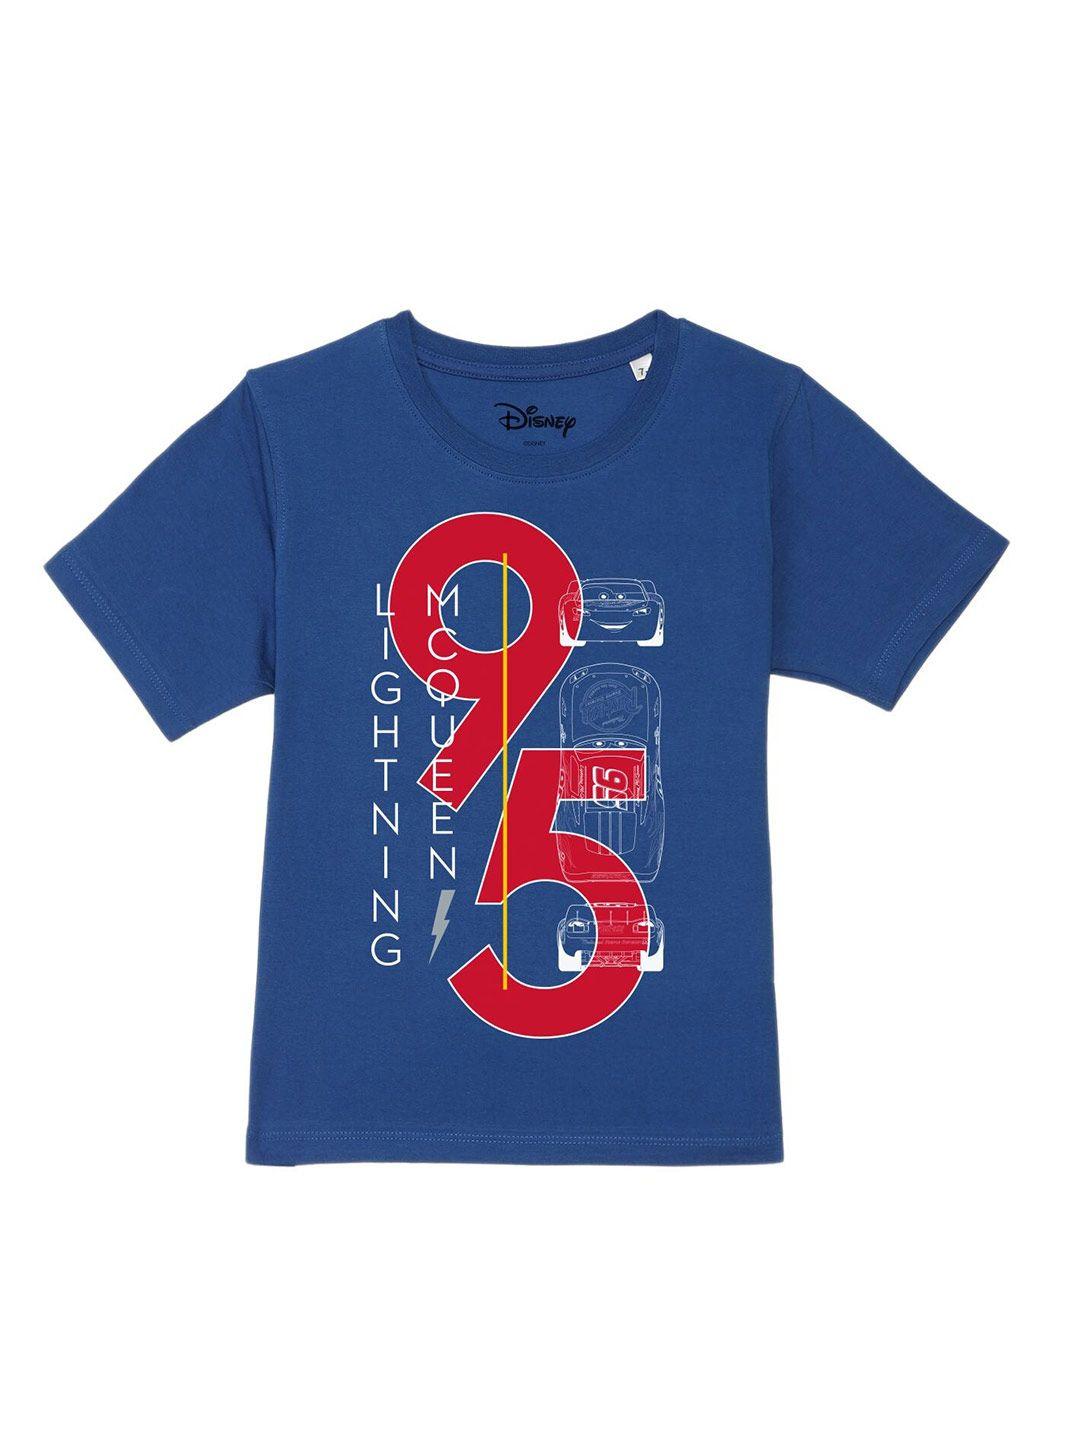 disney by wear your mind boys blue & red printed t-shirt